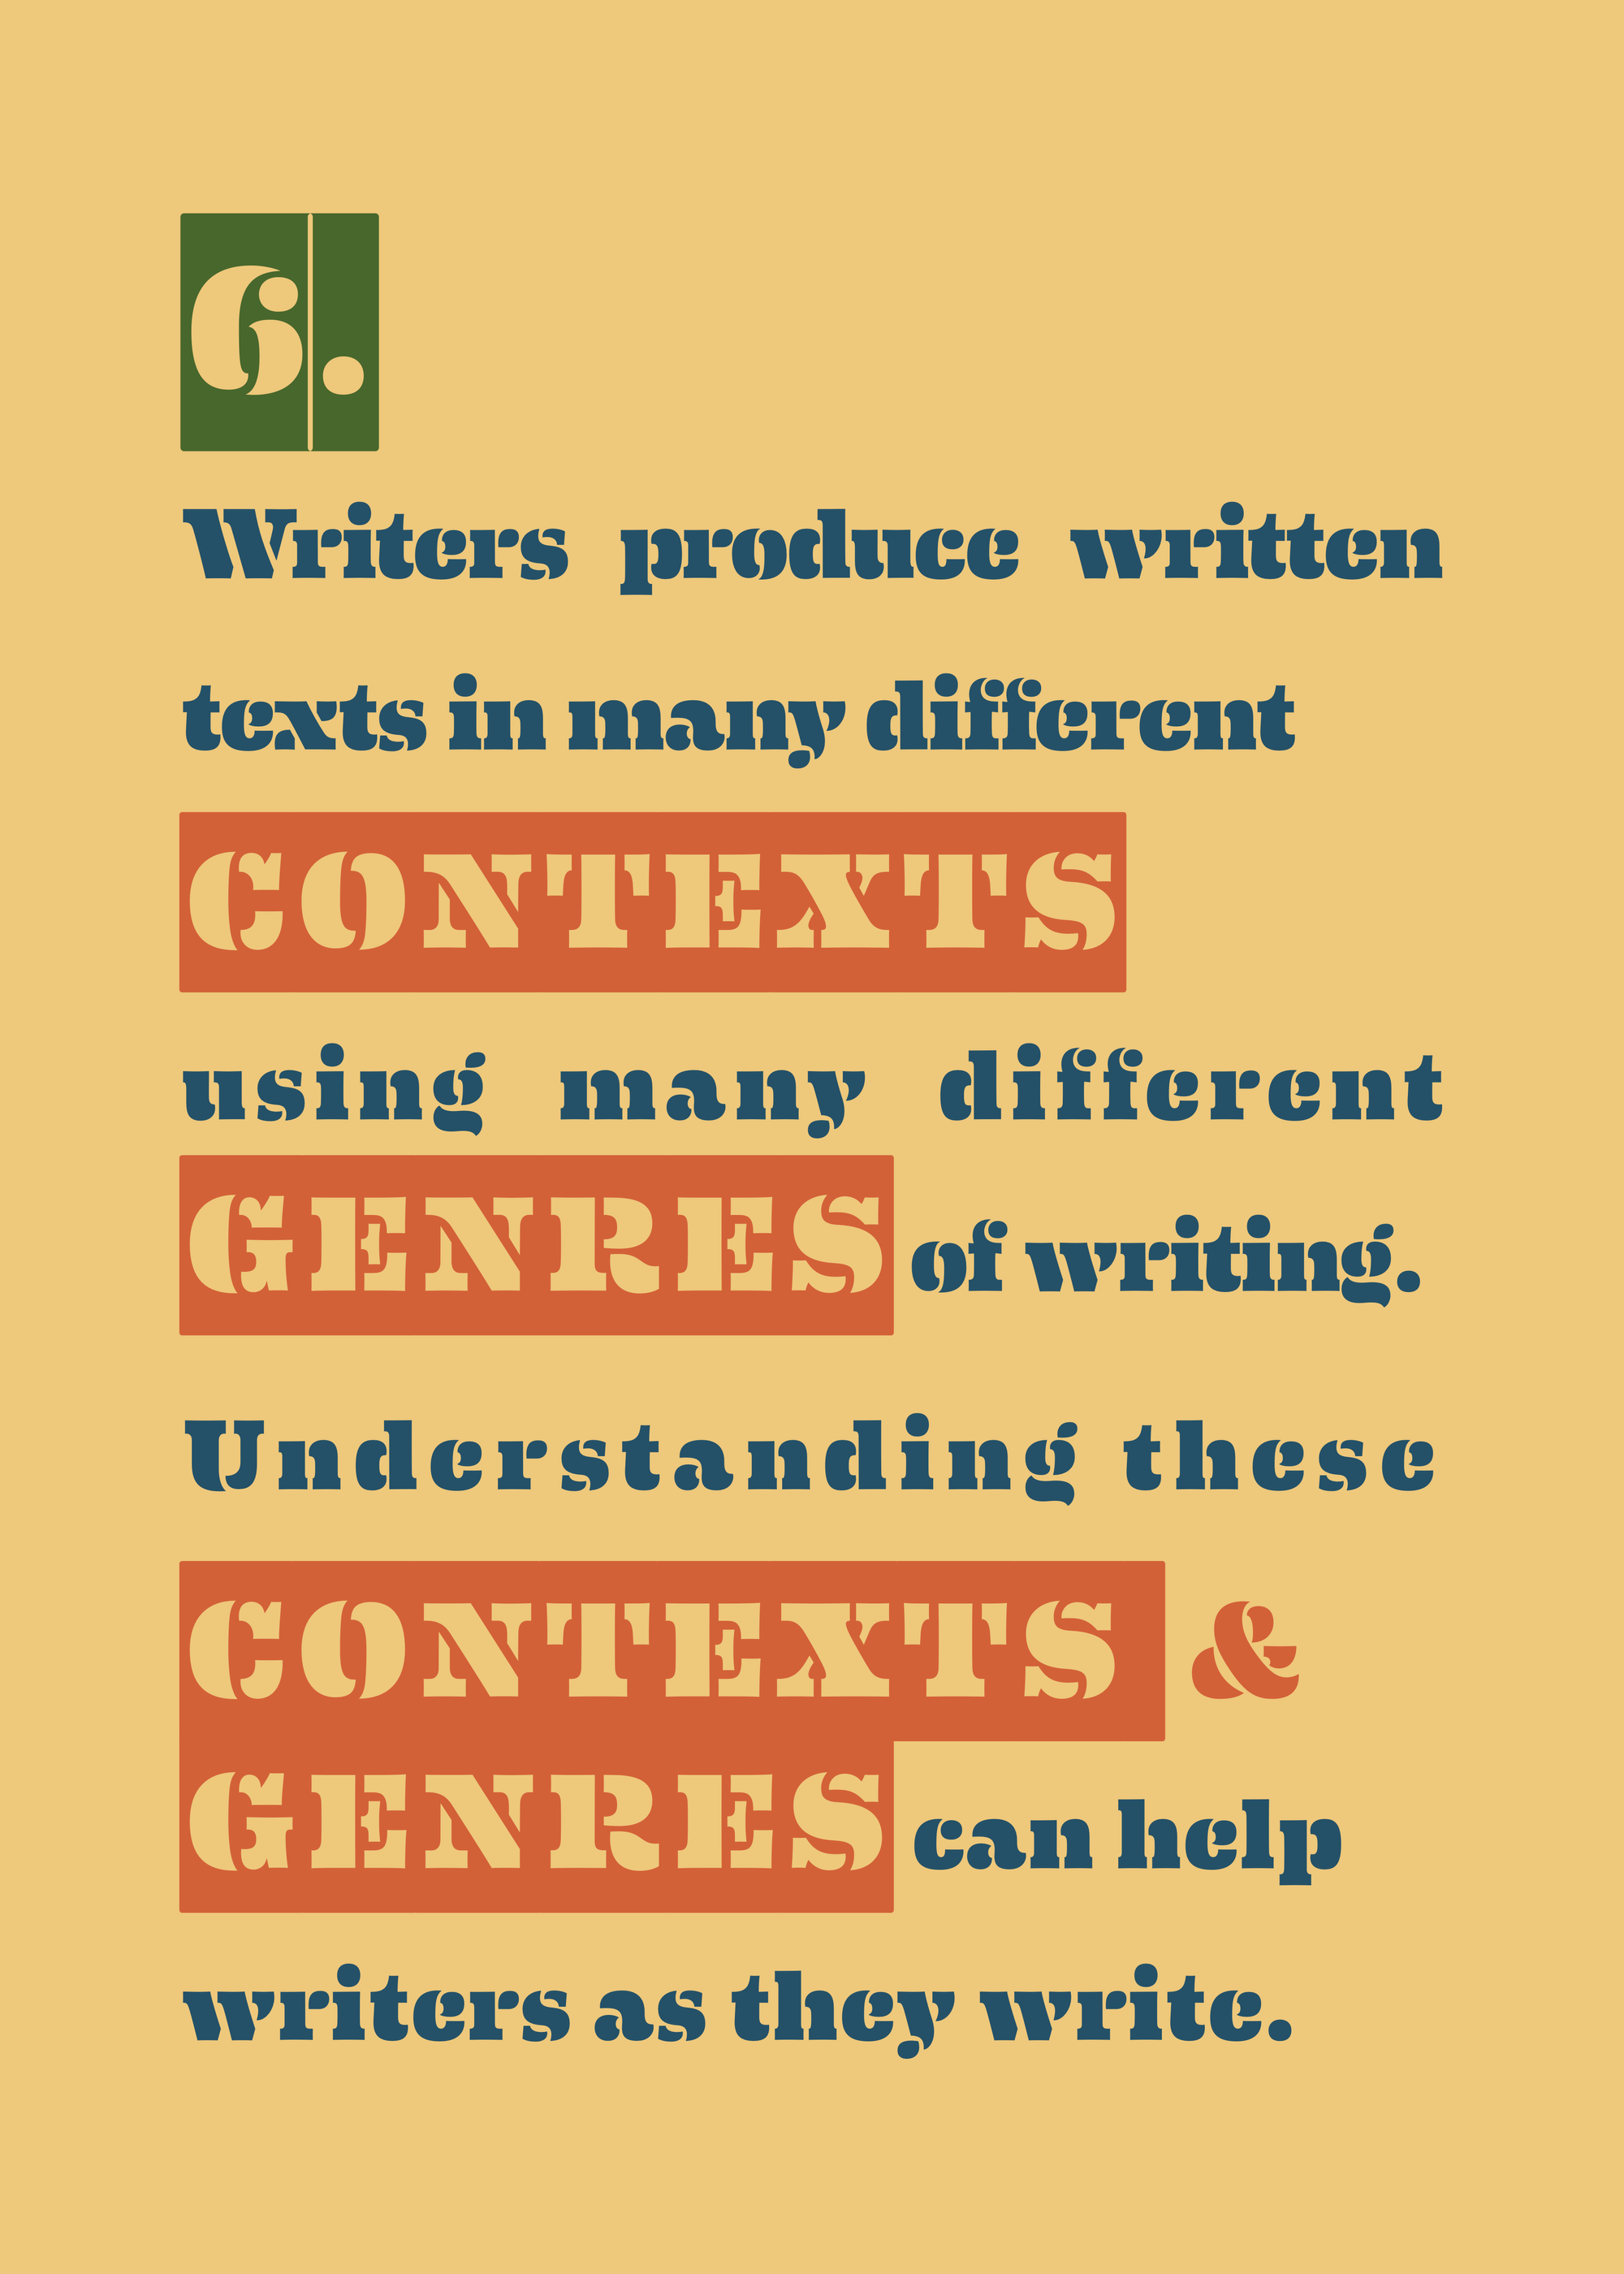 6. Writers produce written texts in many different contexts using many different genres of writing. Understanding these contexts & genres can help writers as they write